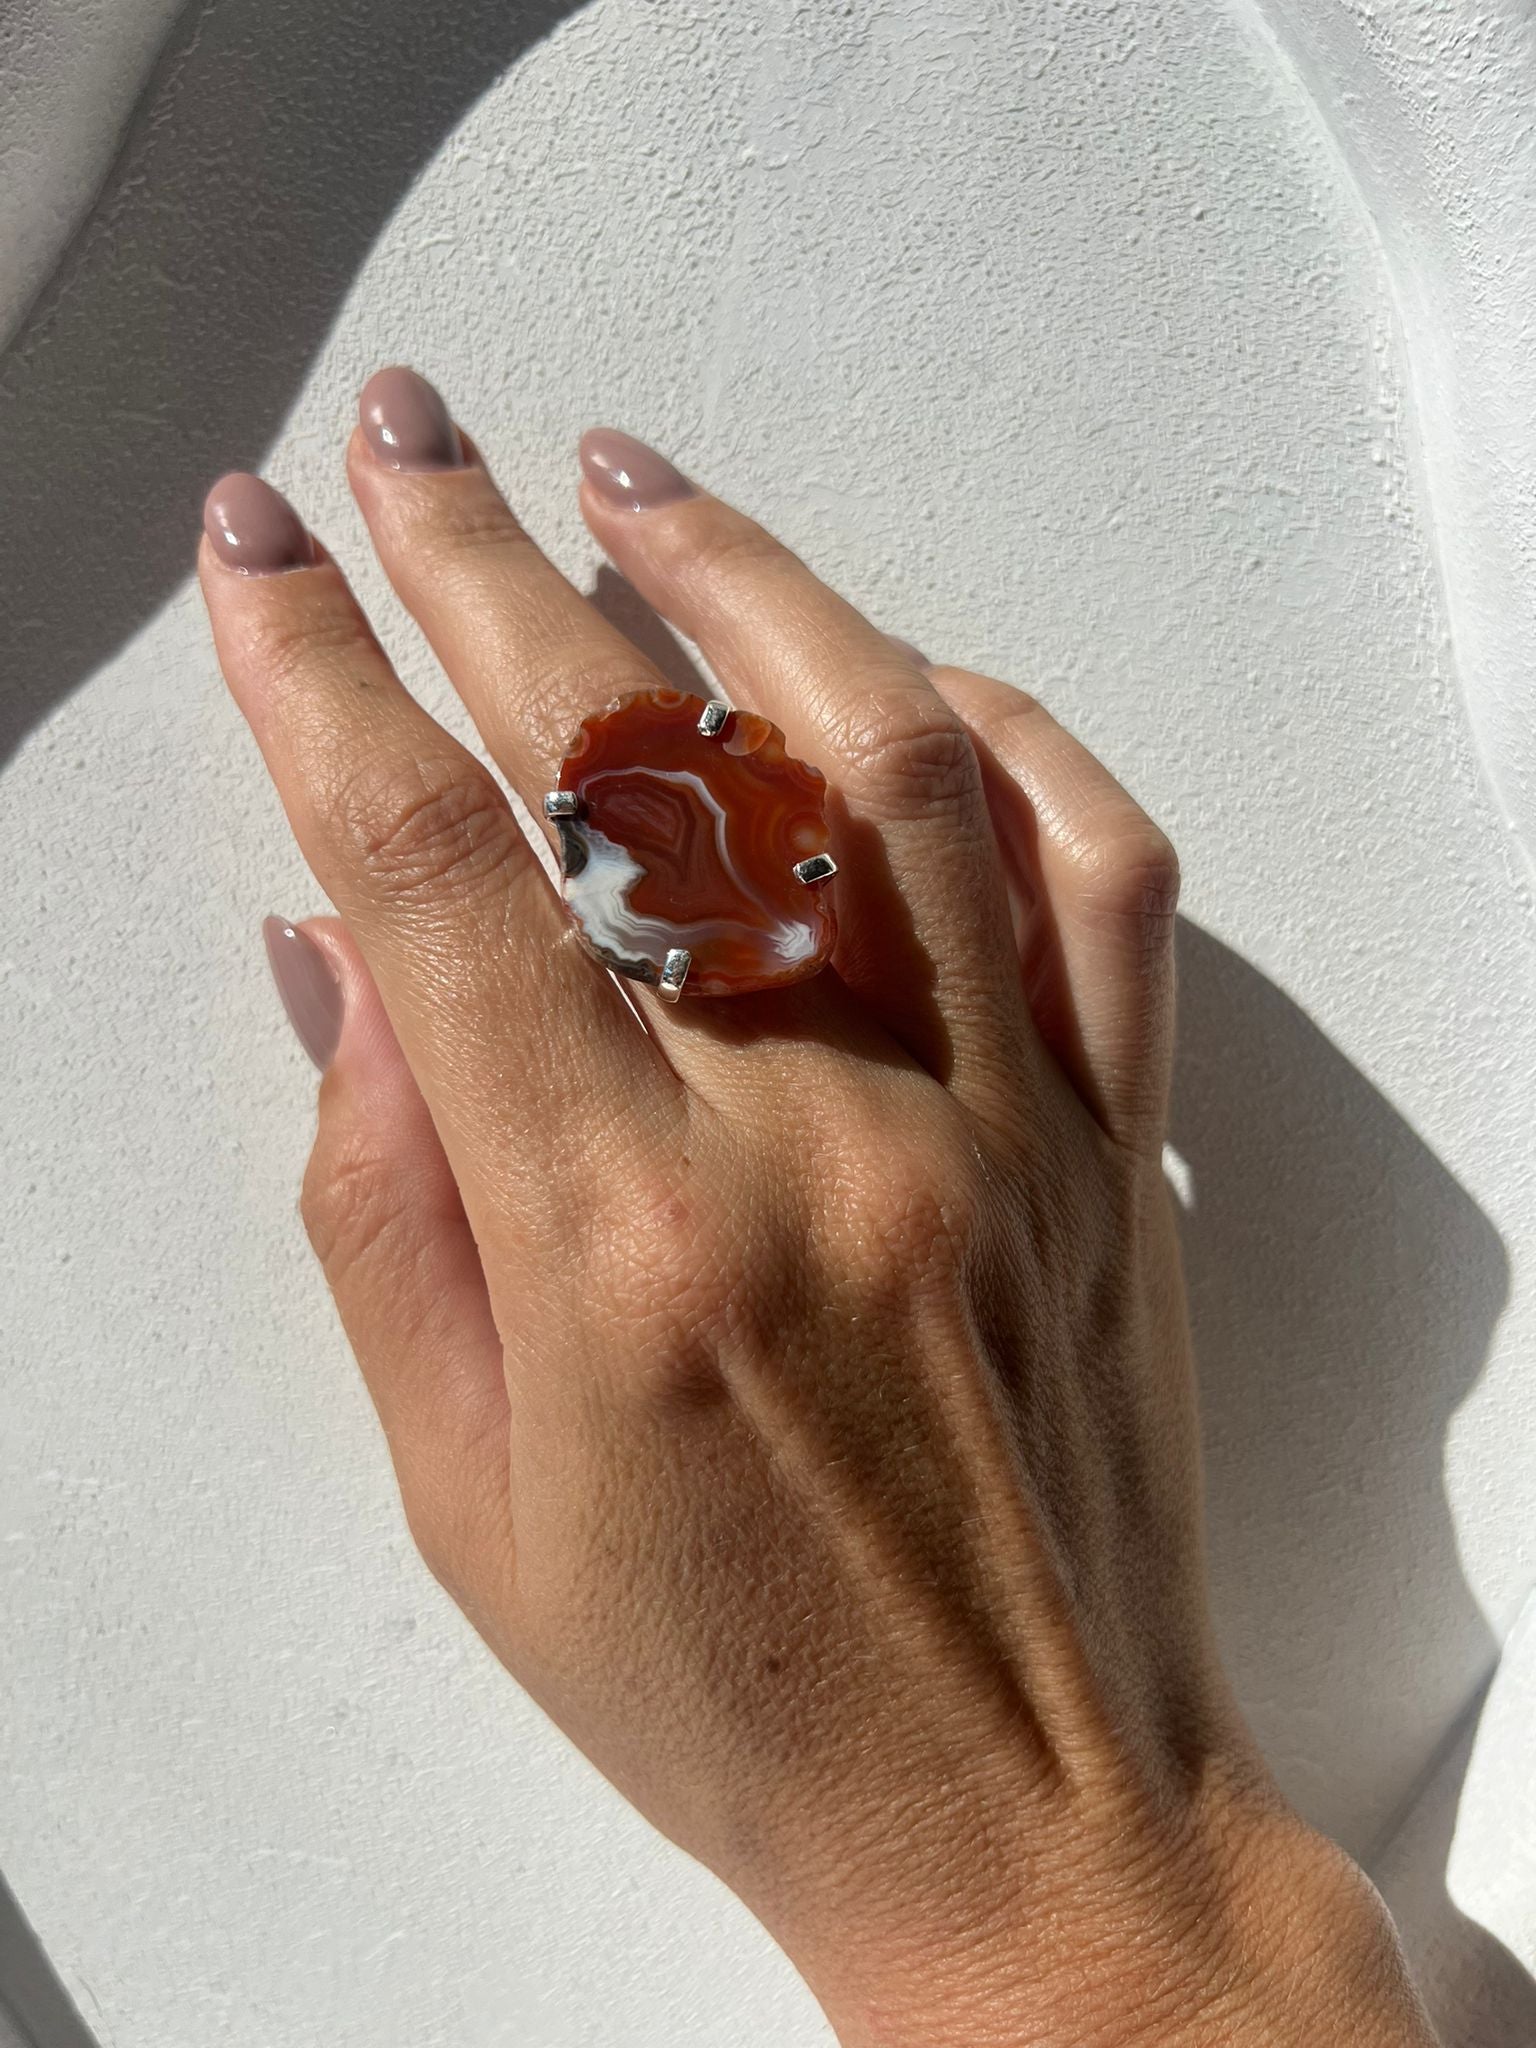 Red Agate Ring